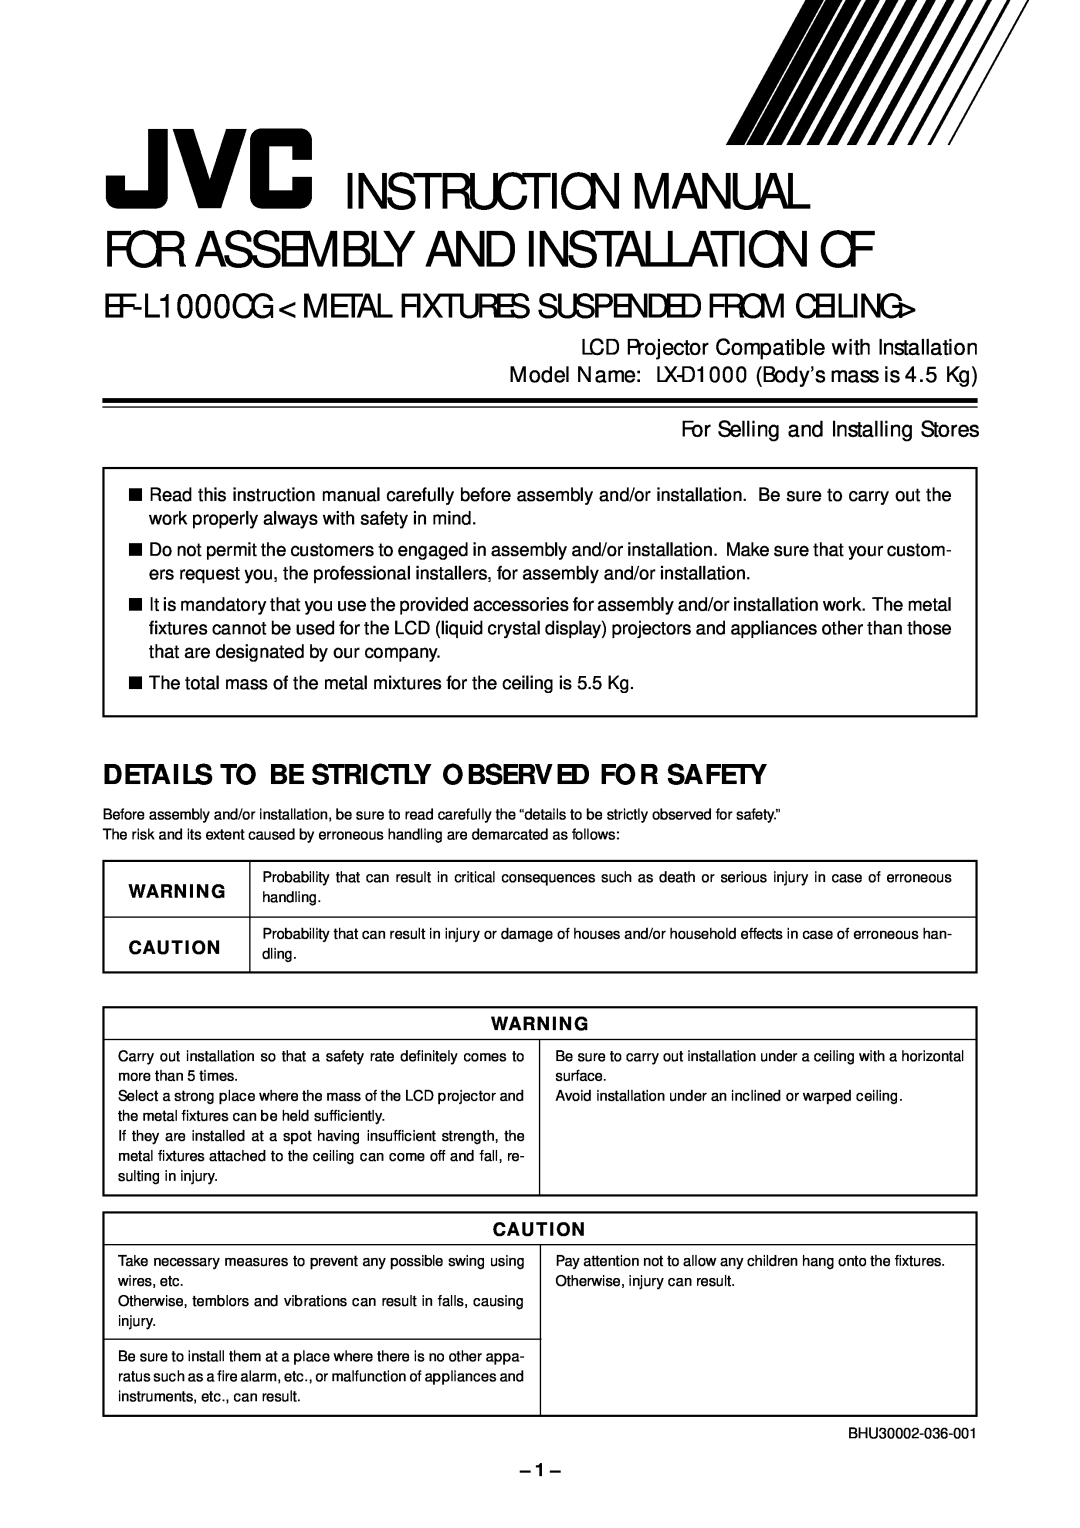 JVC LX-D1000 instruction manual Details To Be Strictly Observed For Safety, LCD Projector Compatible with Installation 